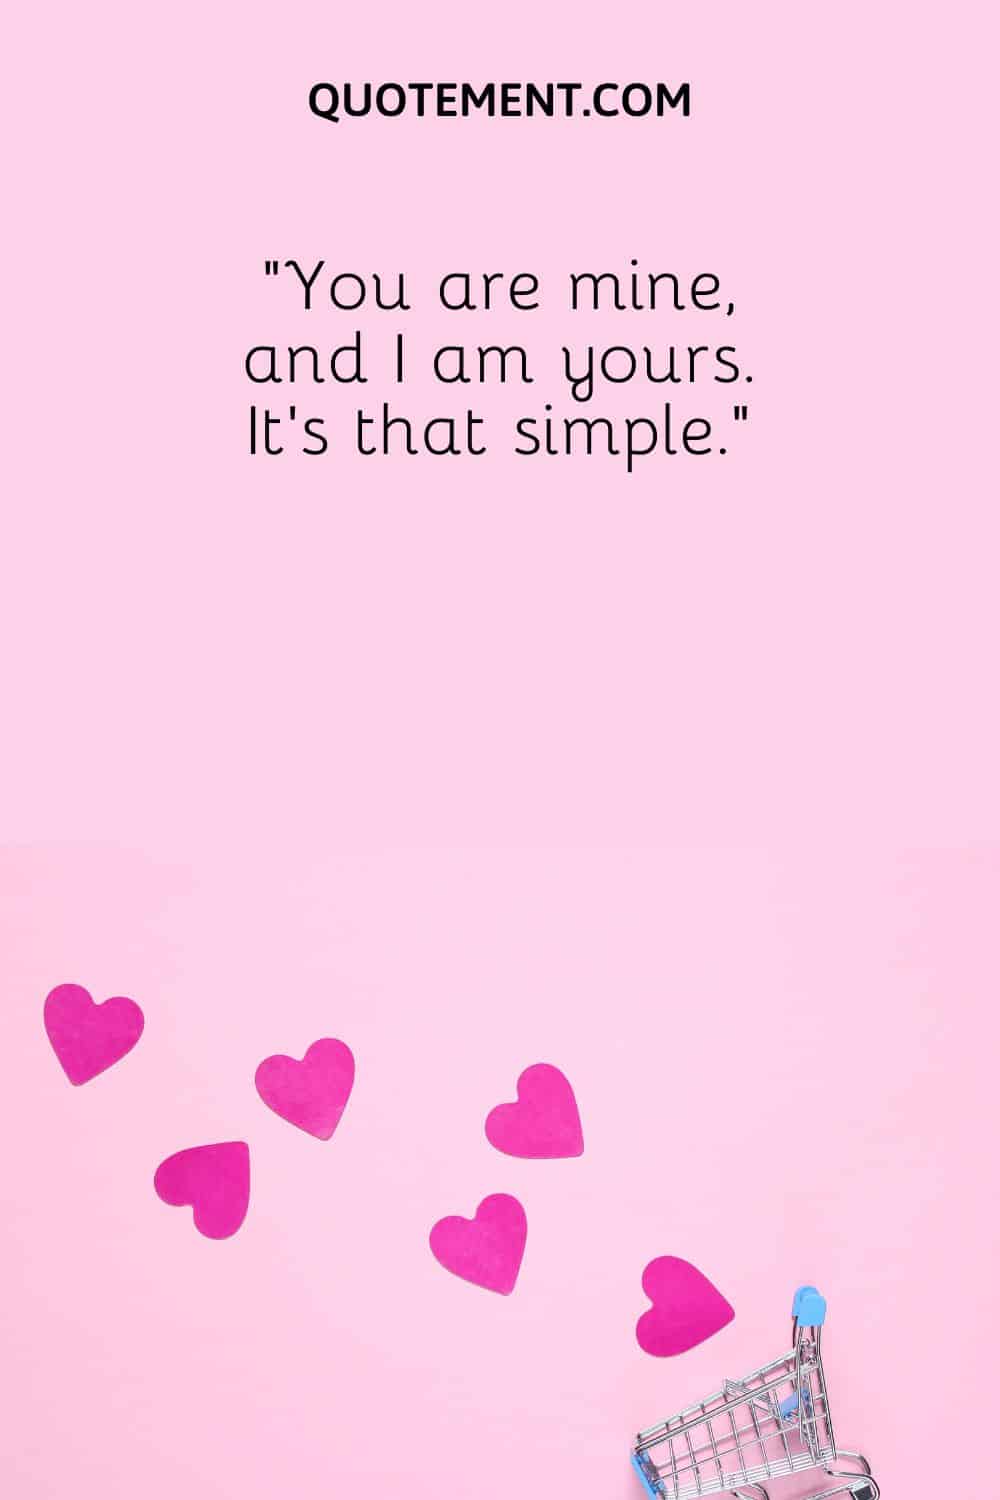 “You are mine, and I am yours. It’s that simple.”